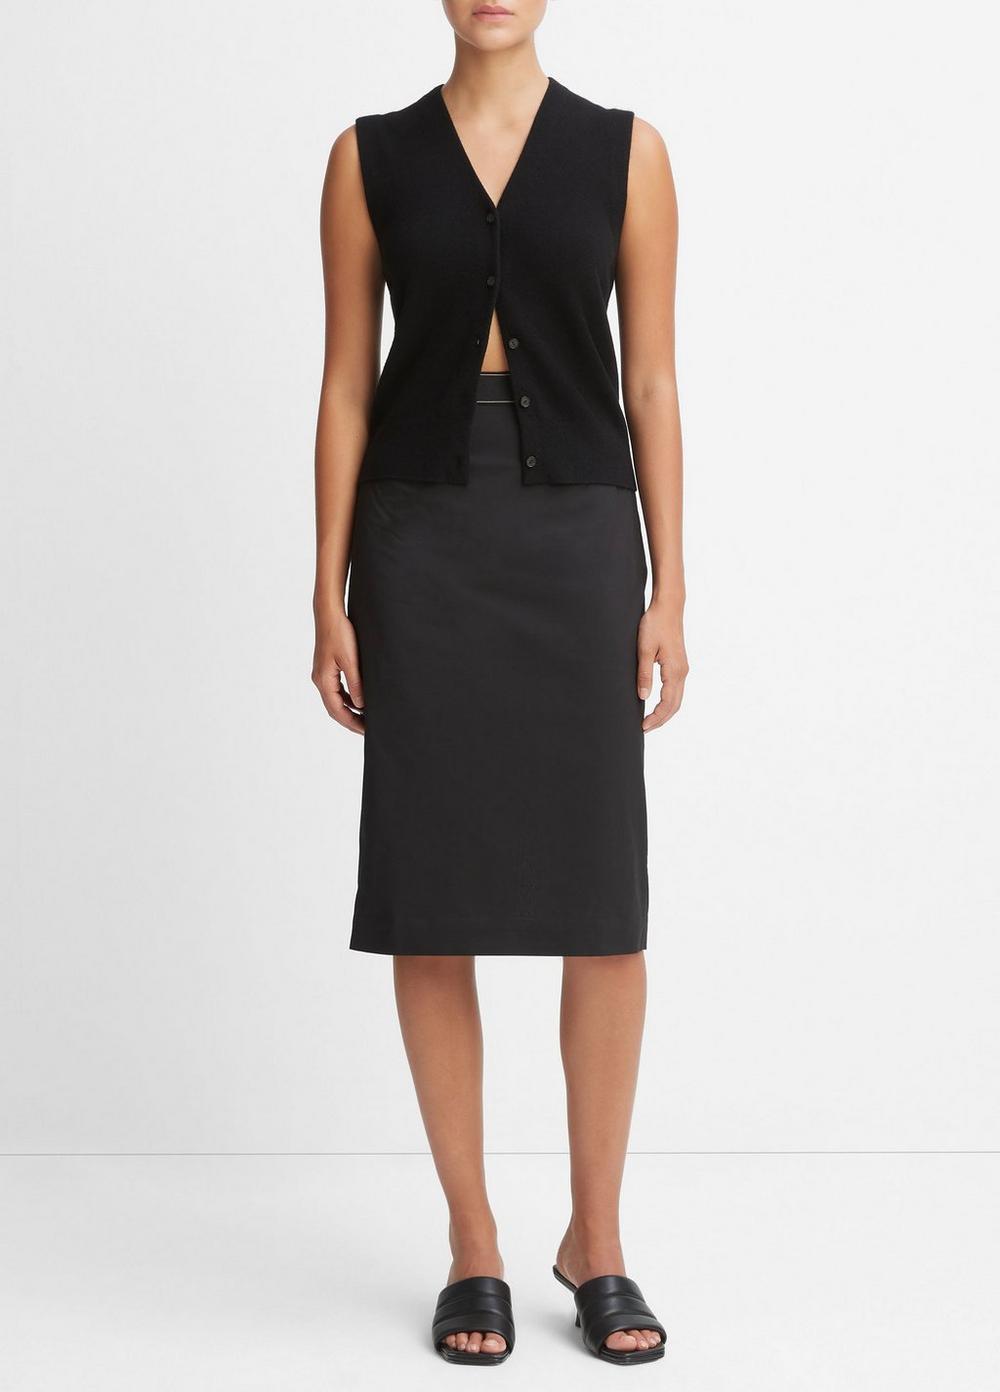 Pull-On Pencil Skirt, Black, Size 4 Vince